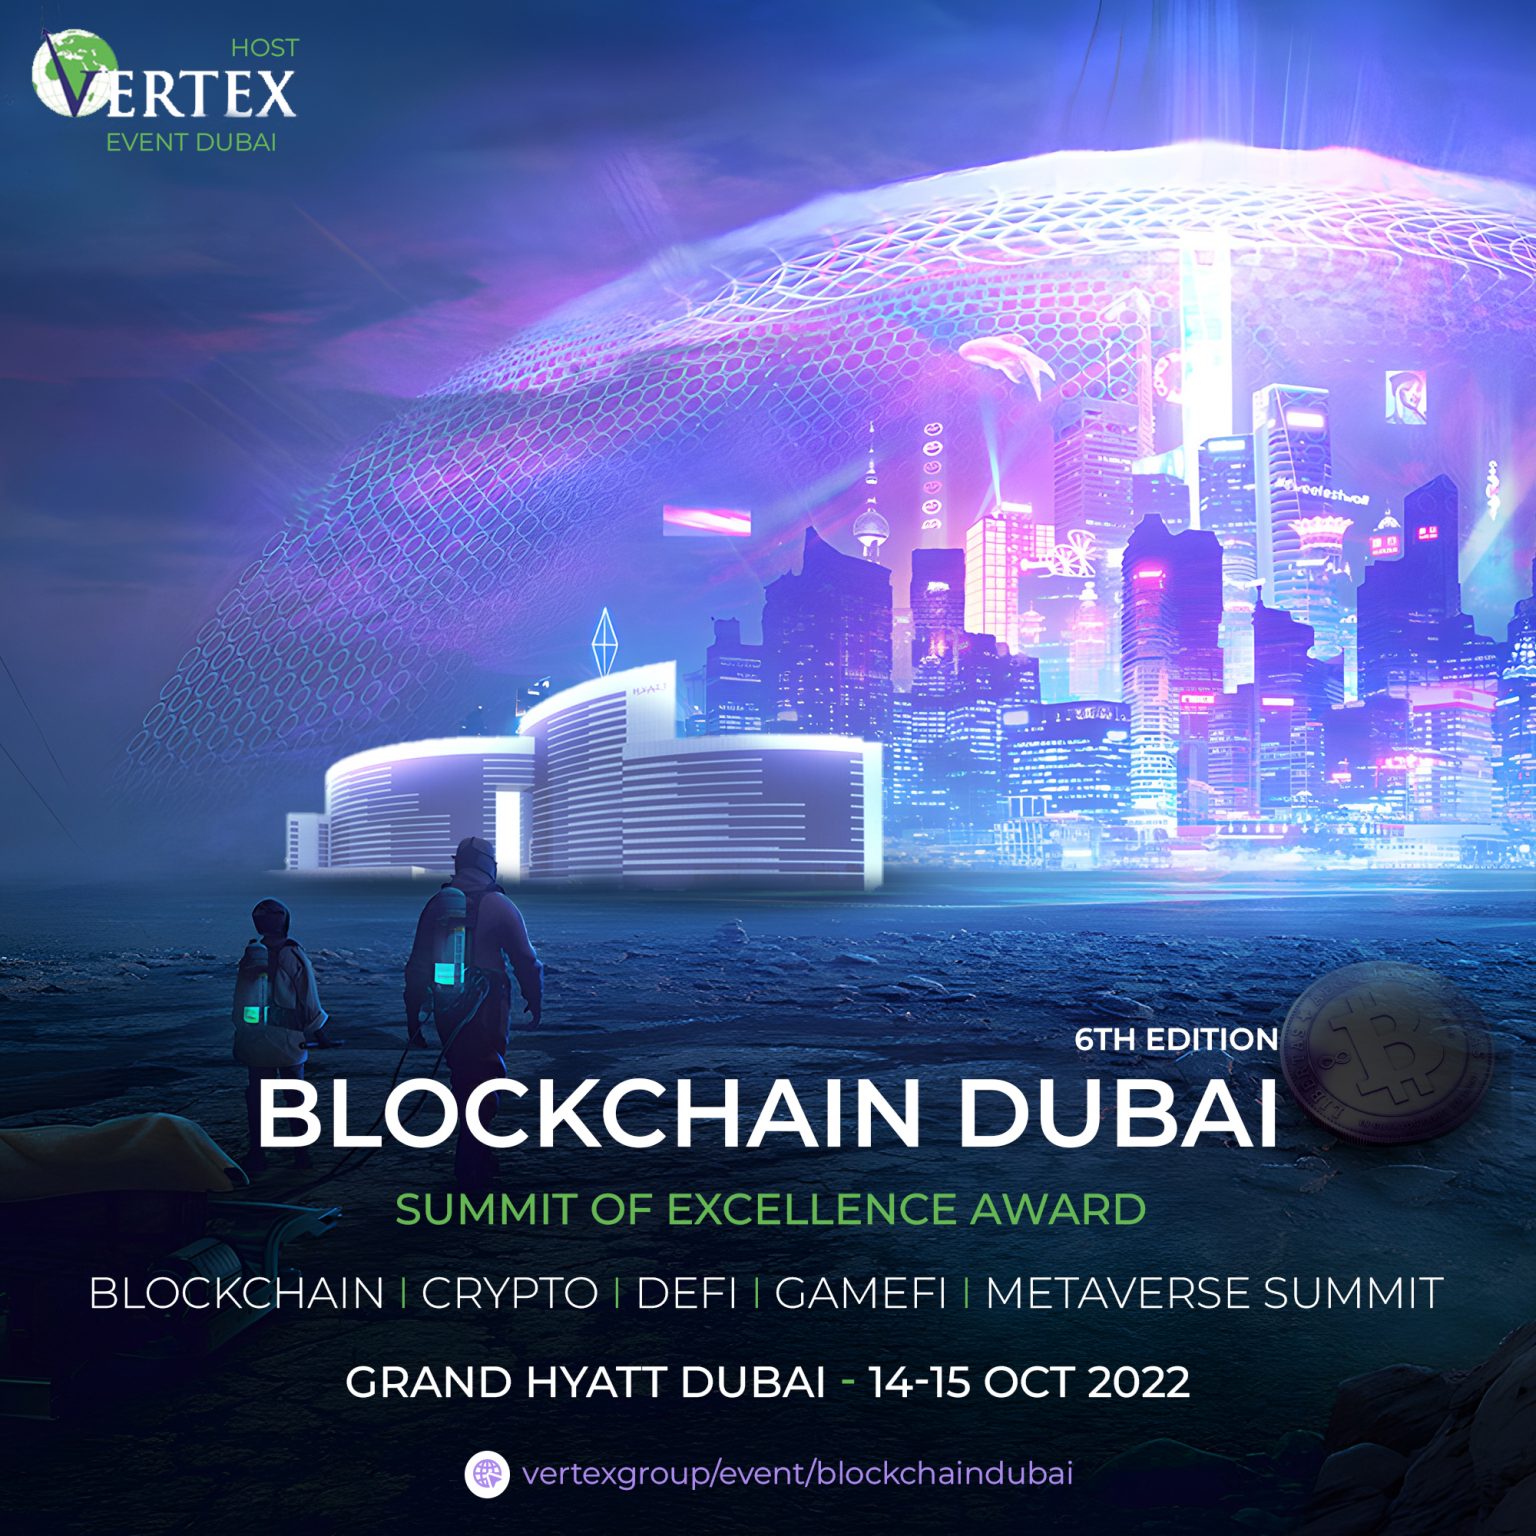 Discover Golden Opportunities for Your Business with Blockchain Dubai